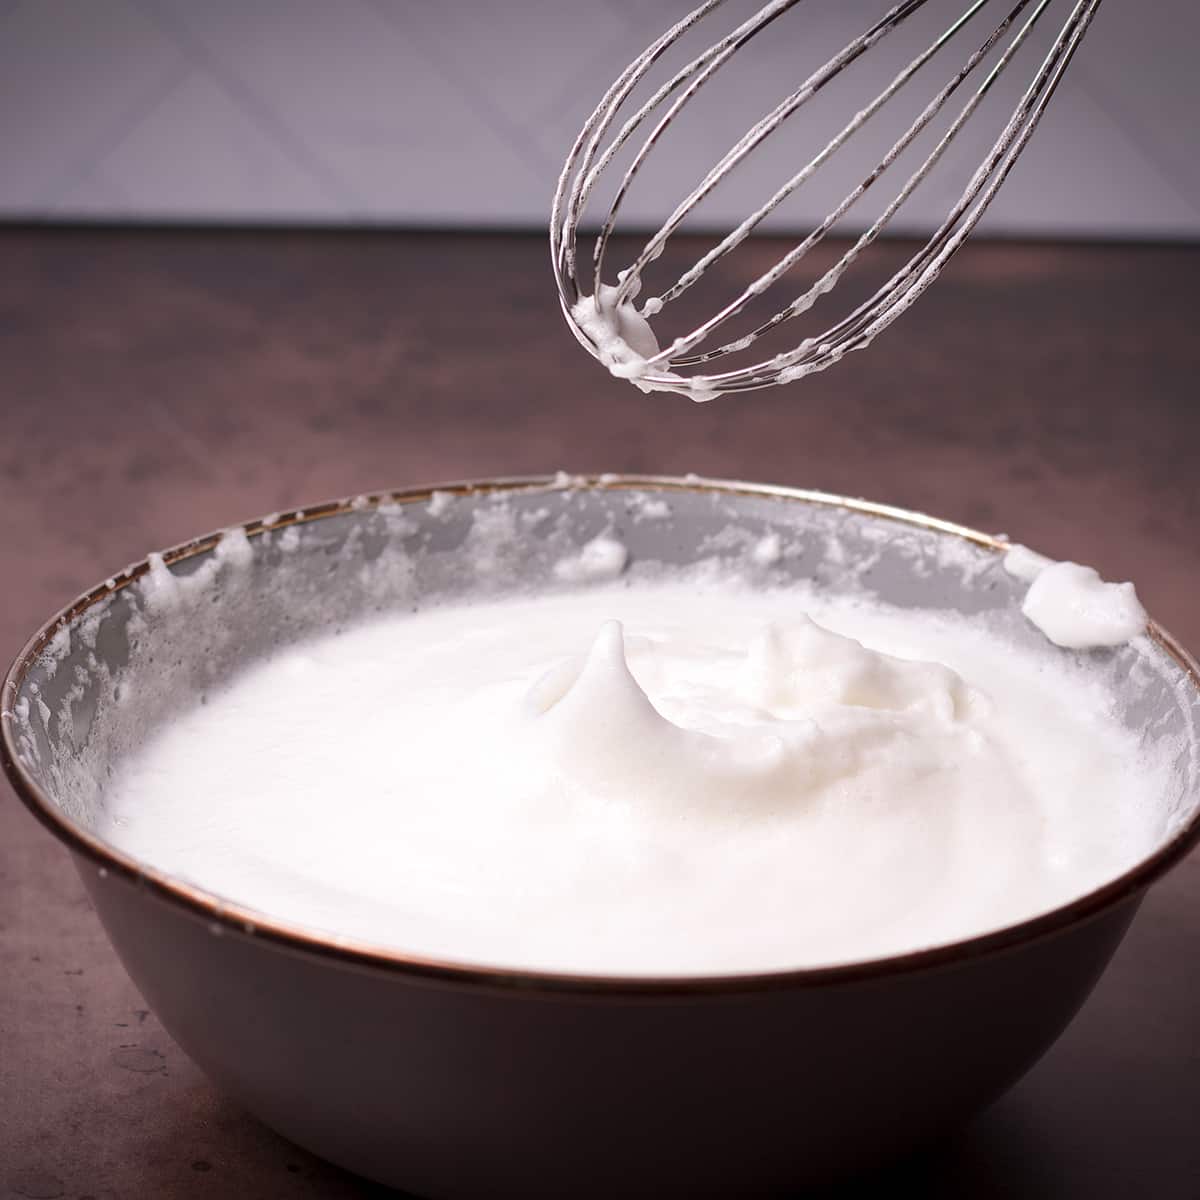 Someone lifting a whisk from a bowl of beaten egg whites to show that the egg whites are at the stiff peak stage.